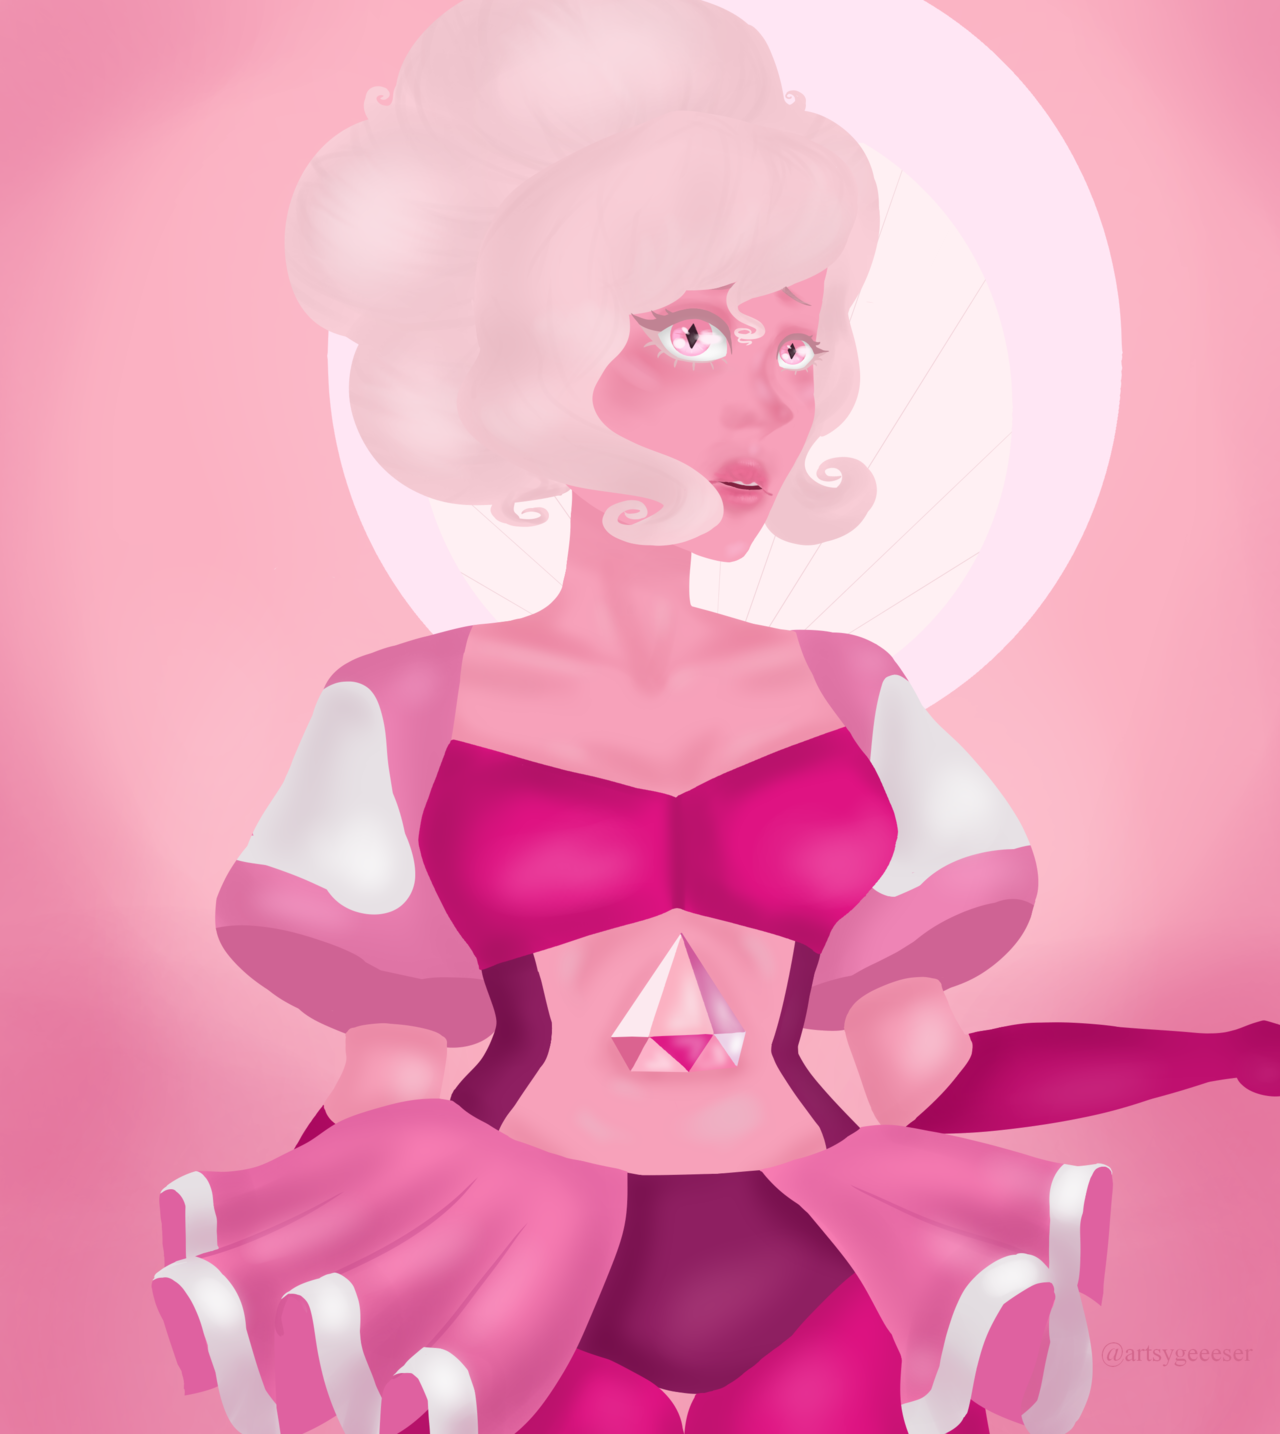 I wanted to draw Pink Diamond but i got kinda lazy after a while. I haven’t drawn in forever and my back hurts like hell from sitting by my desk all day but i kinda liked how it turned out, the...